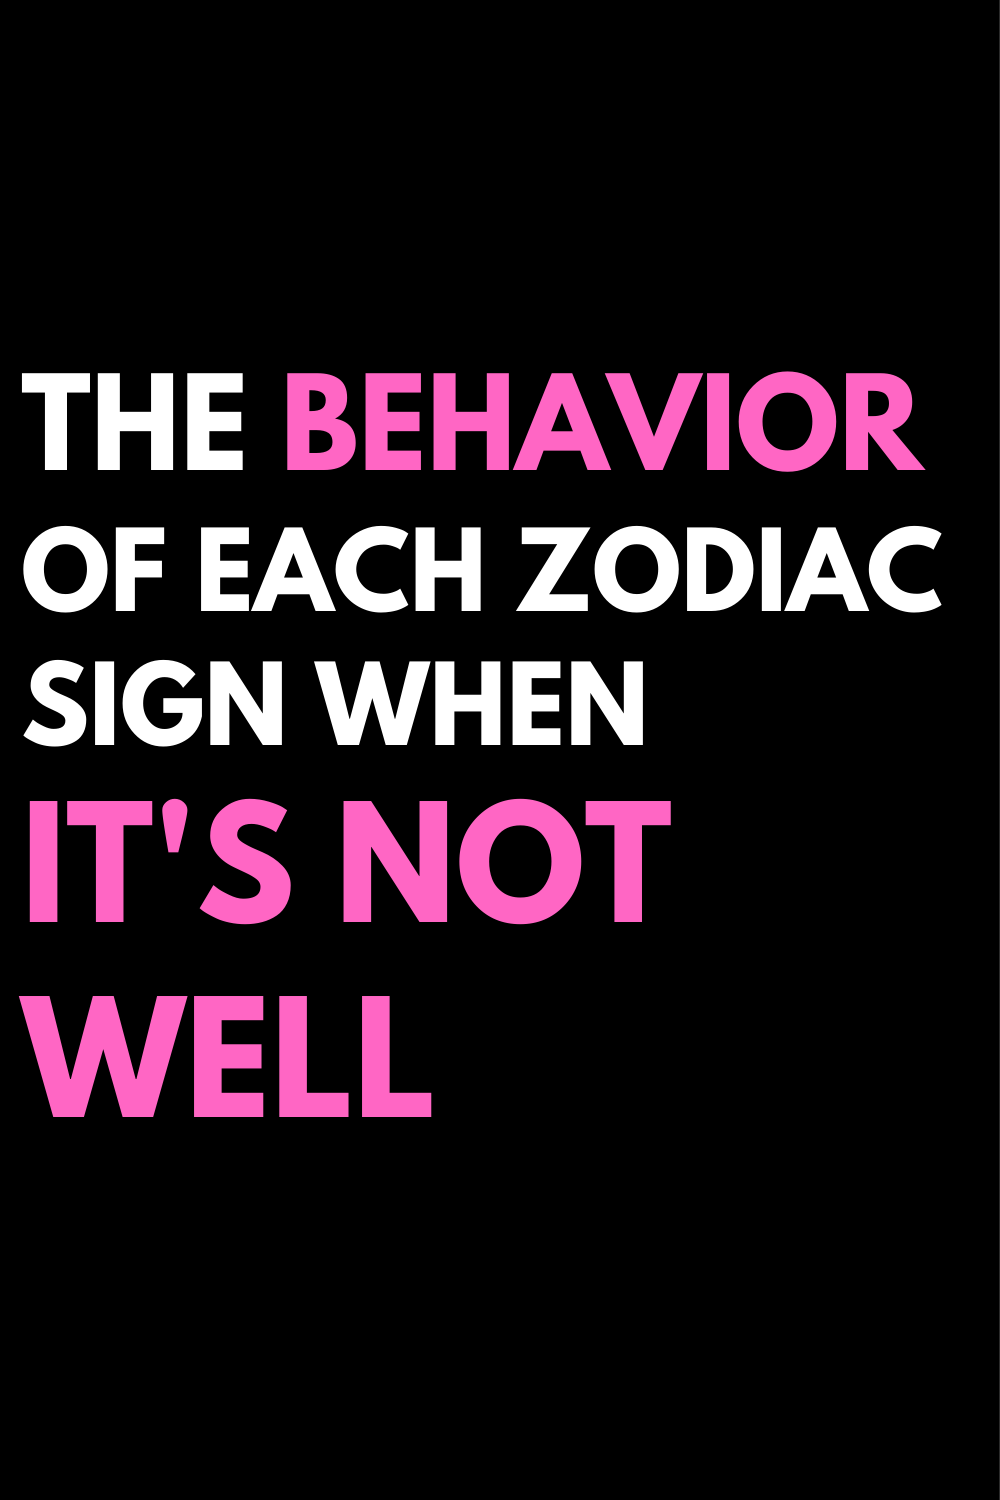 The Behavior Of Each Zodiac Sign When It's Not Well